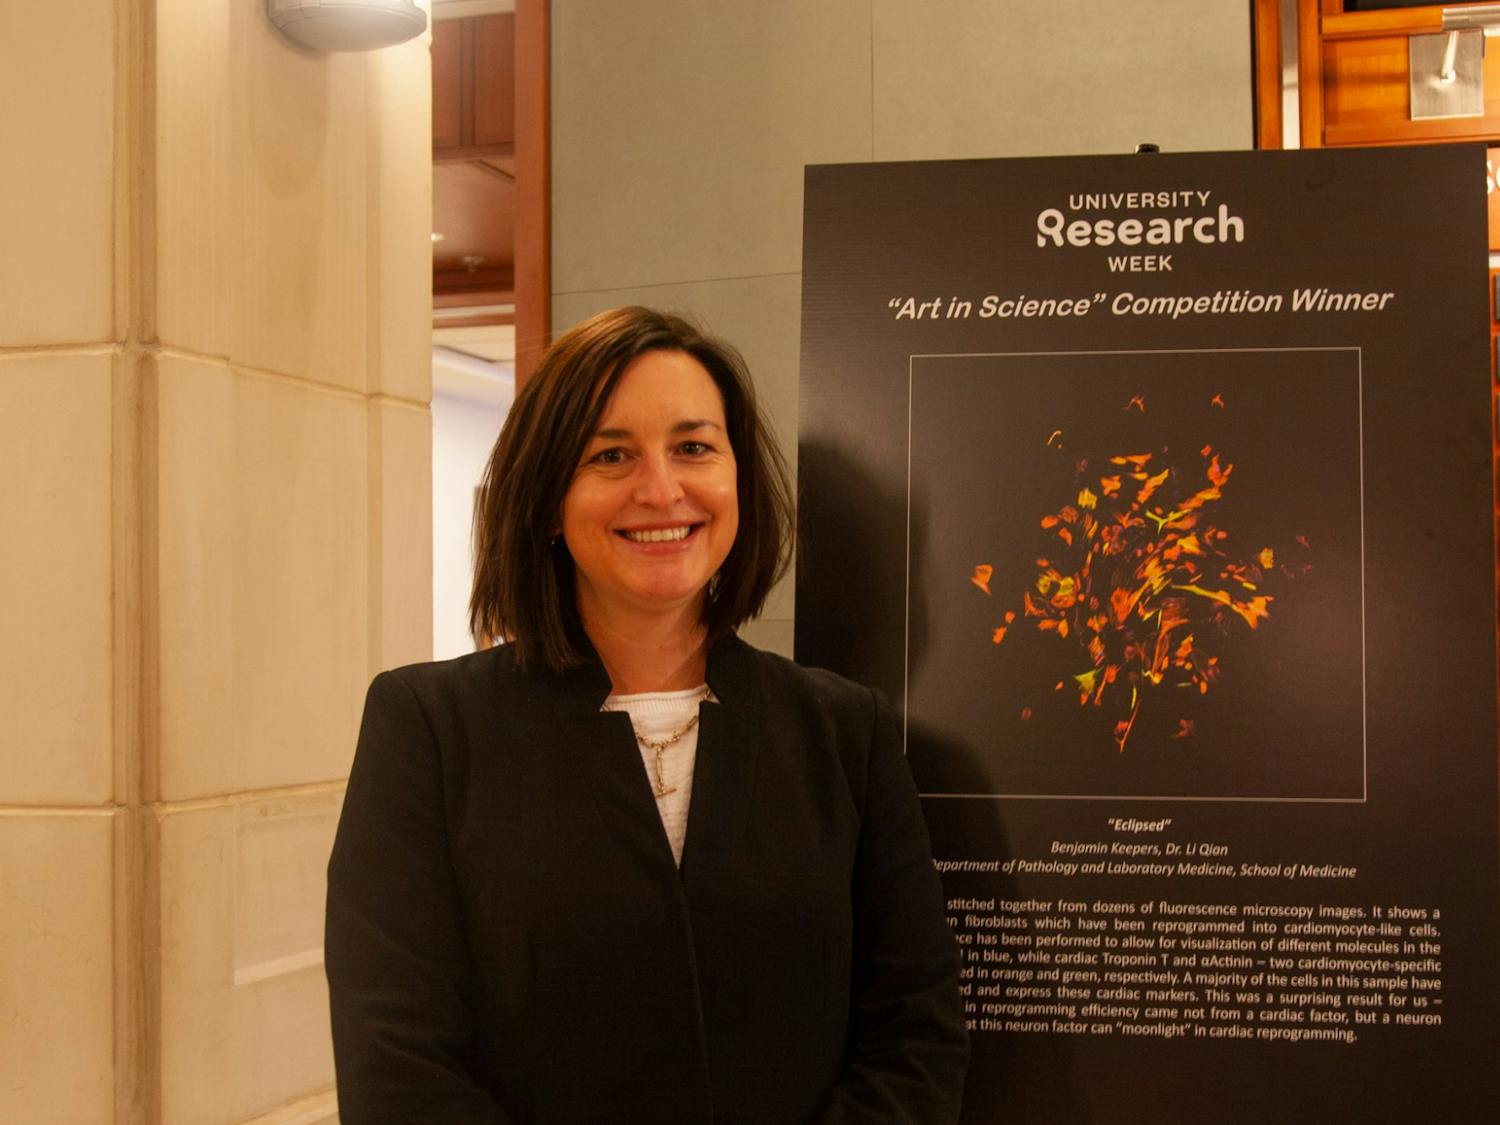 Layla Dowdy poses in front of the “Art in Science” exhibit at Bondurant Hall on Nov. 8. Dowdy is the Director of the office of Research Communications and is a main organizer of the University Research Week.  